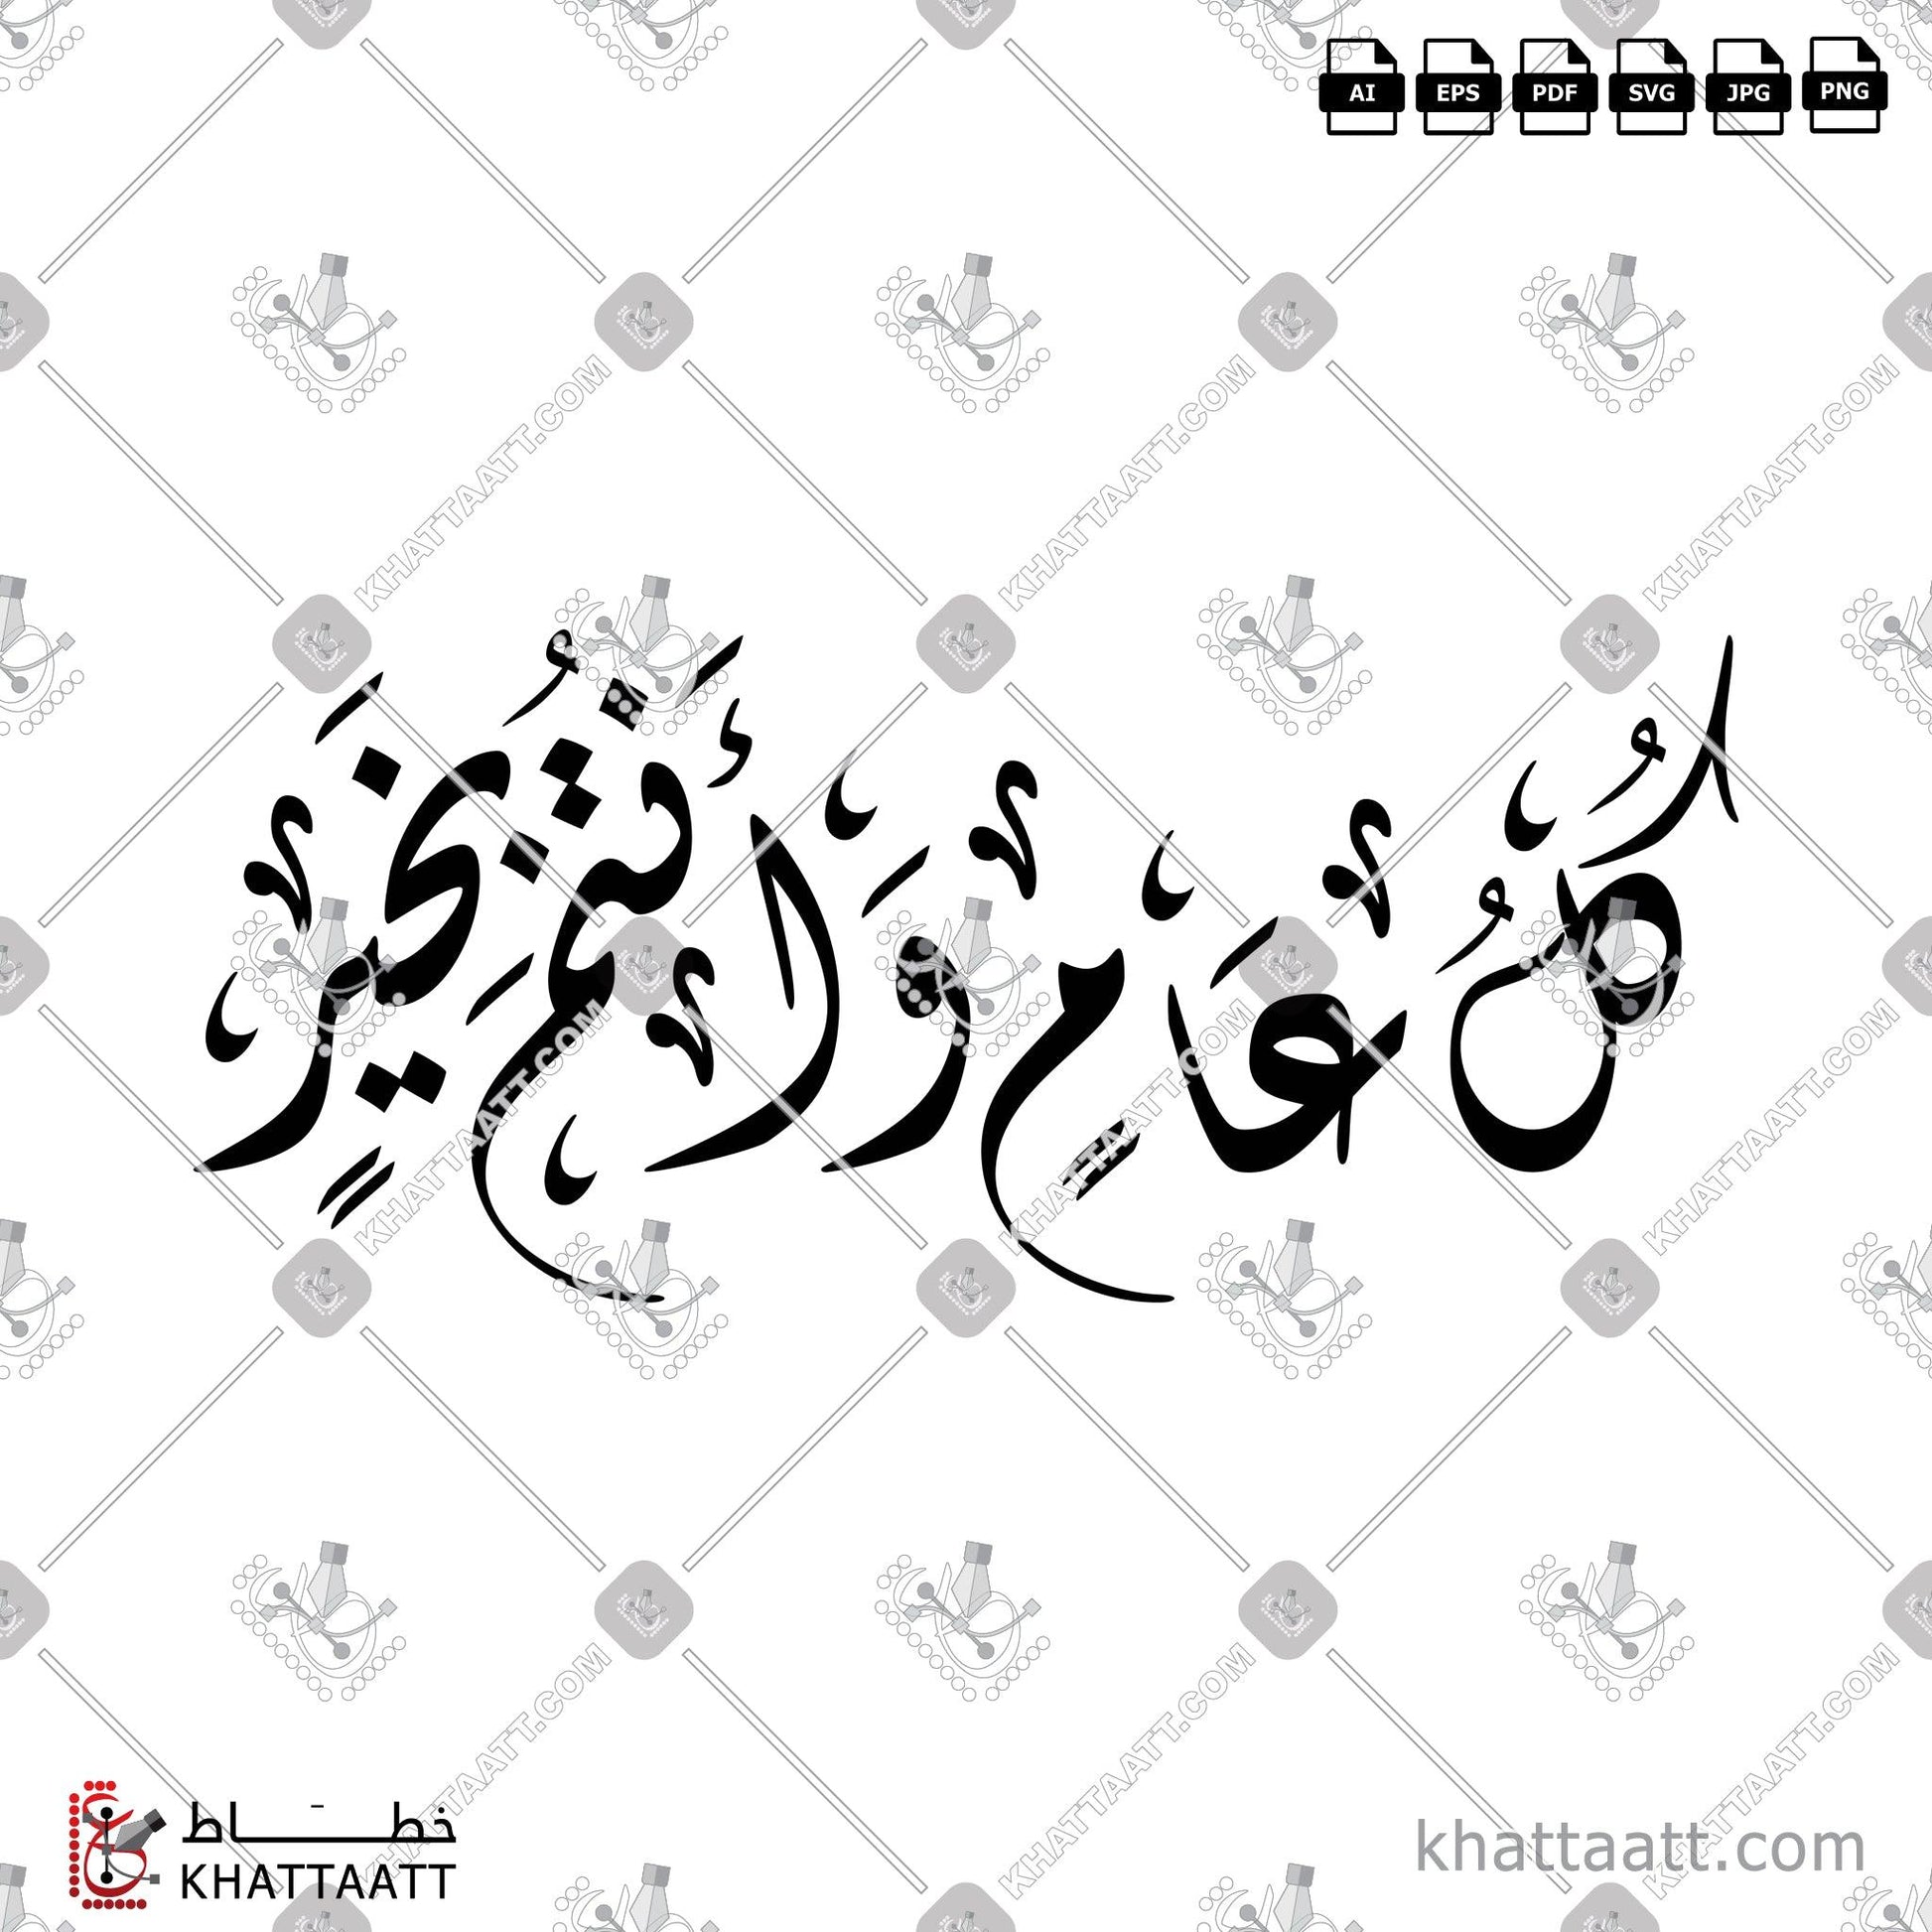 Download Arabic Calligraphy of كل عام وأنتم بخير in Diwani - الخط الديواني in vector and .png